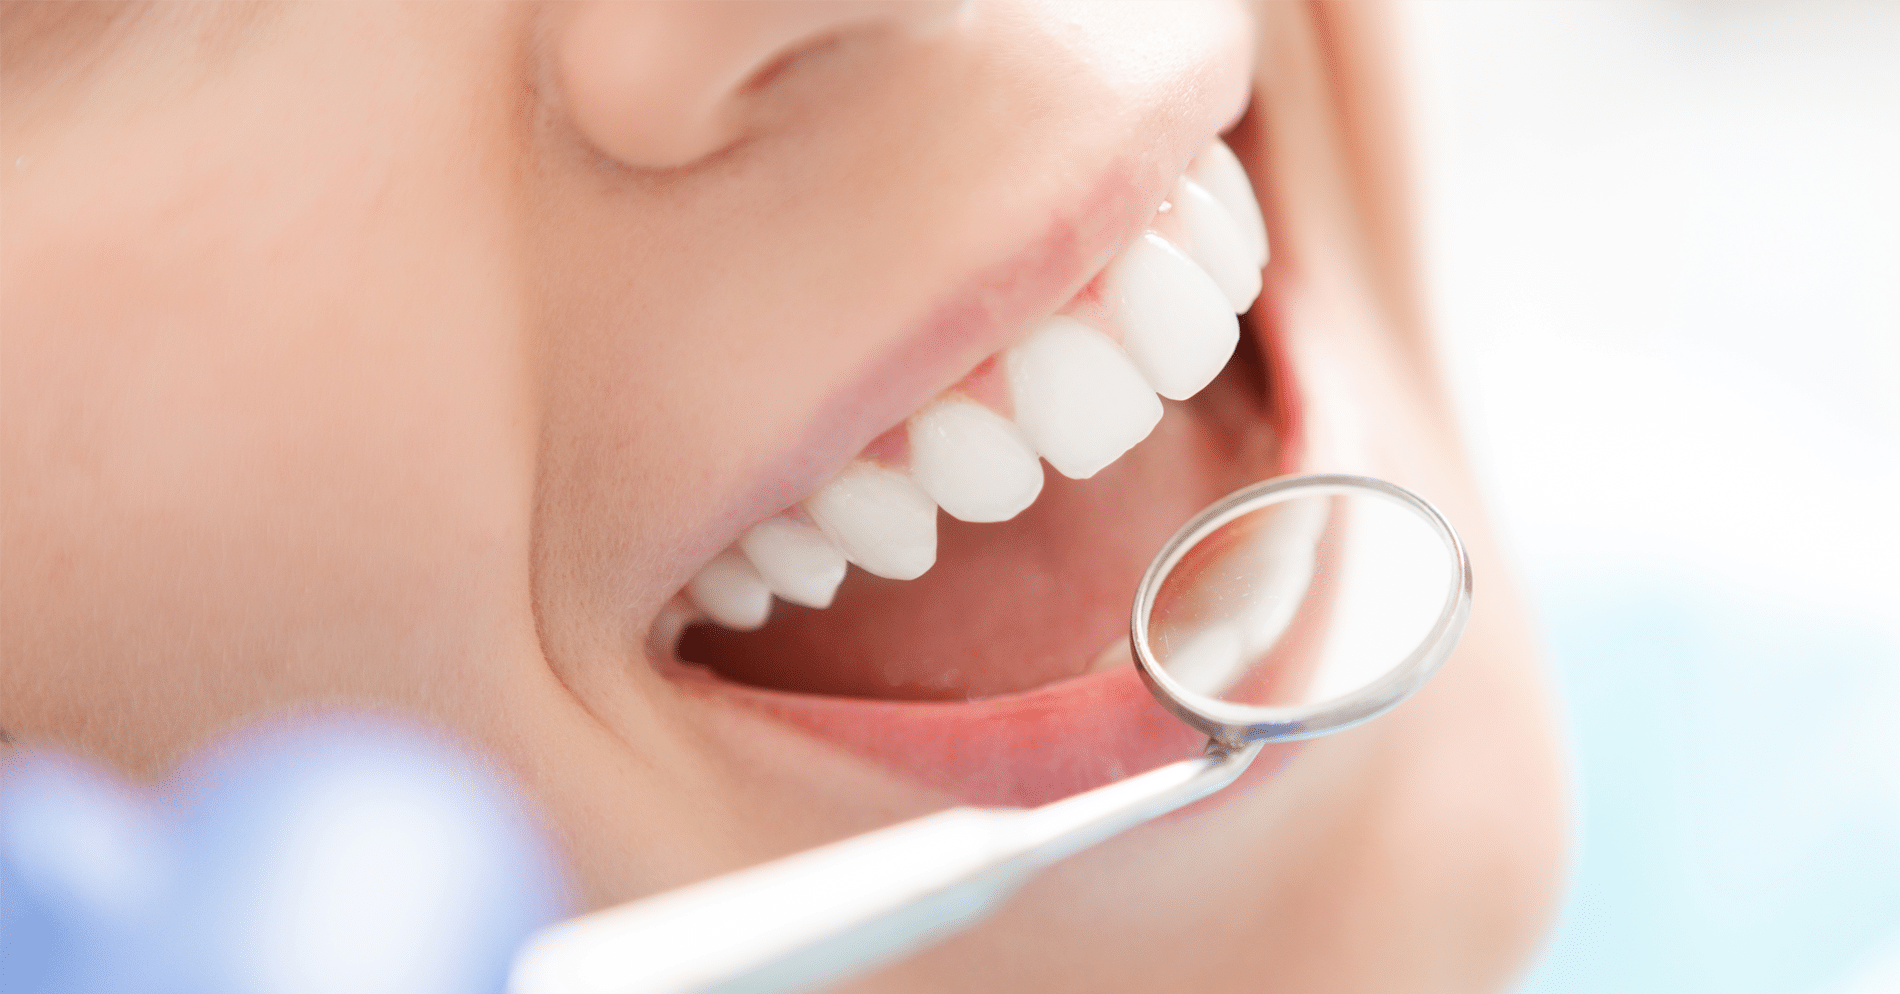 Preventive Measures for Better Oral Health